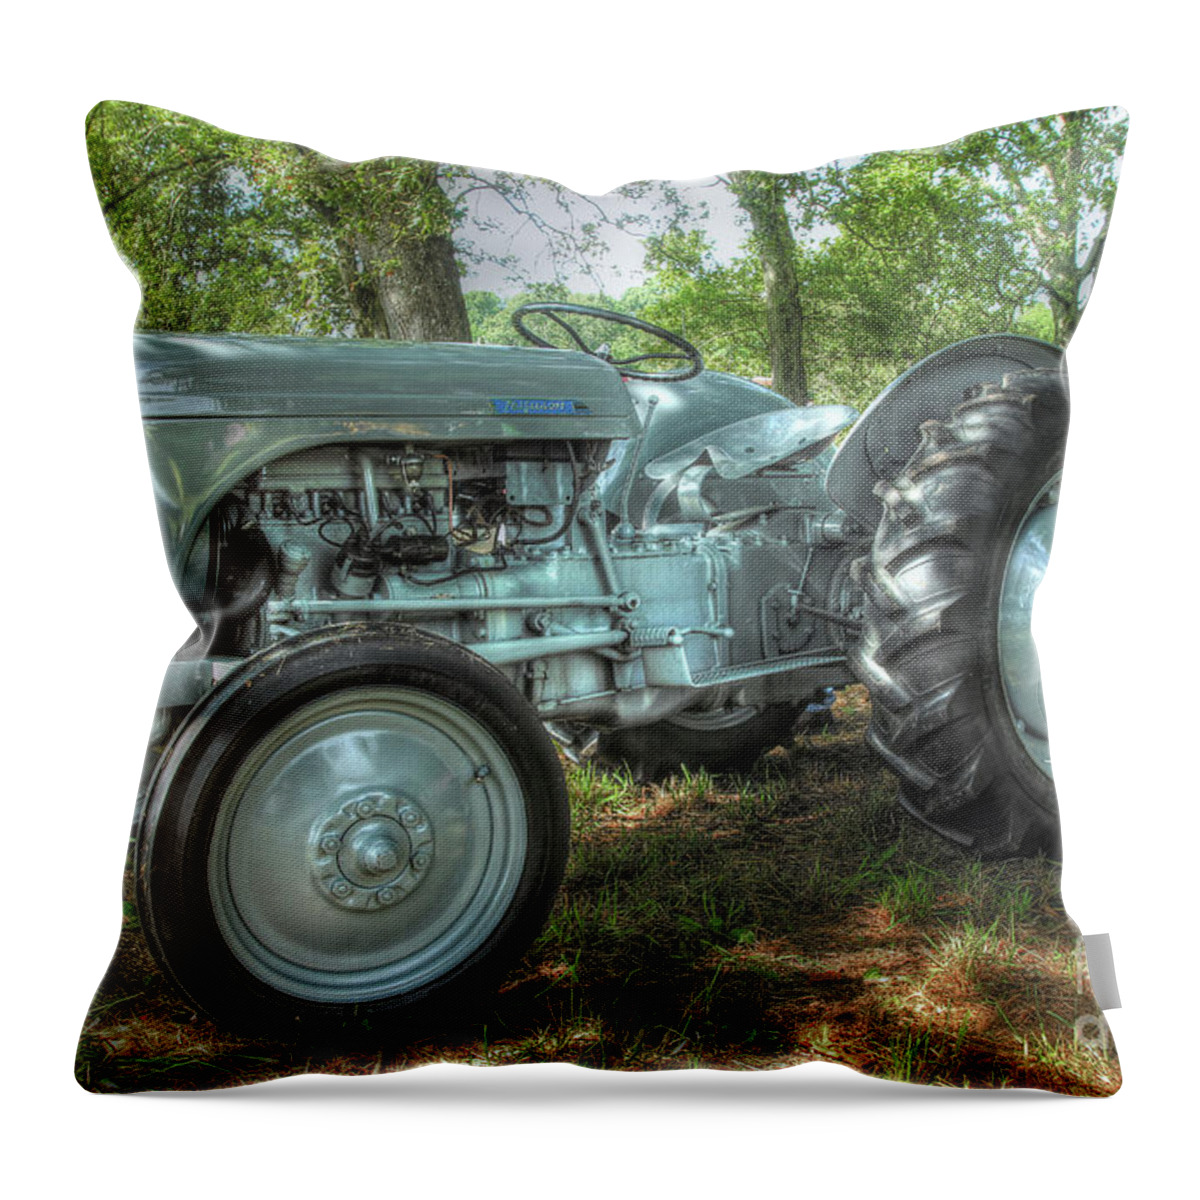 Tractor Throw Pillow featuring the photograph Ferguson Tractor by Mike Eingle